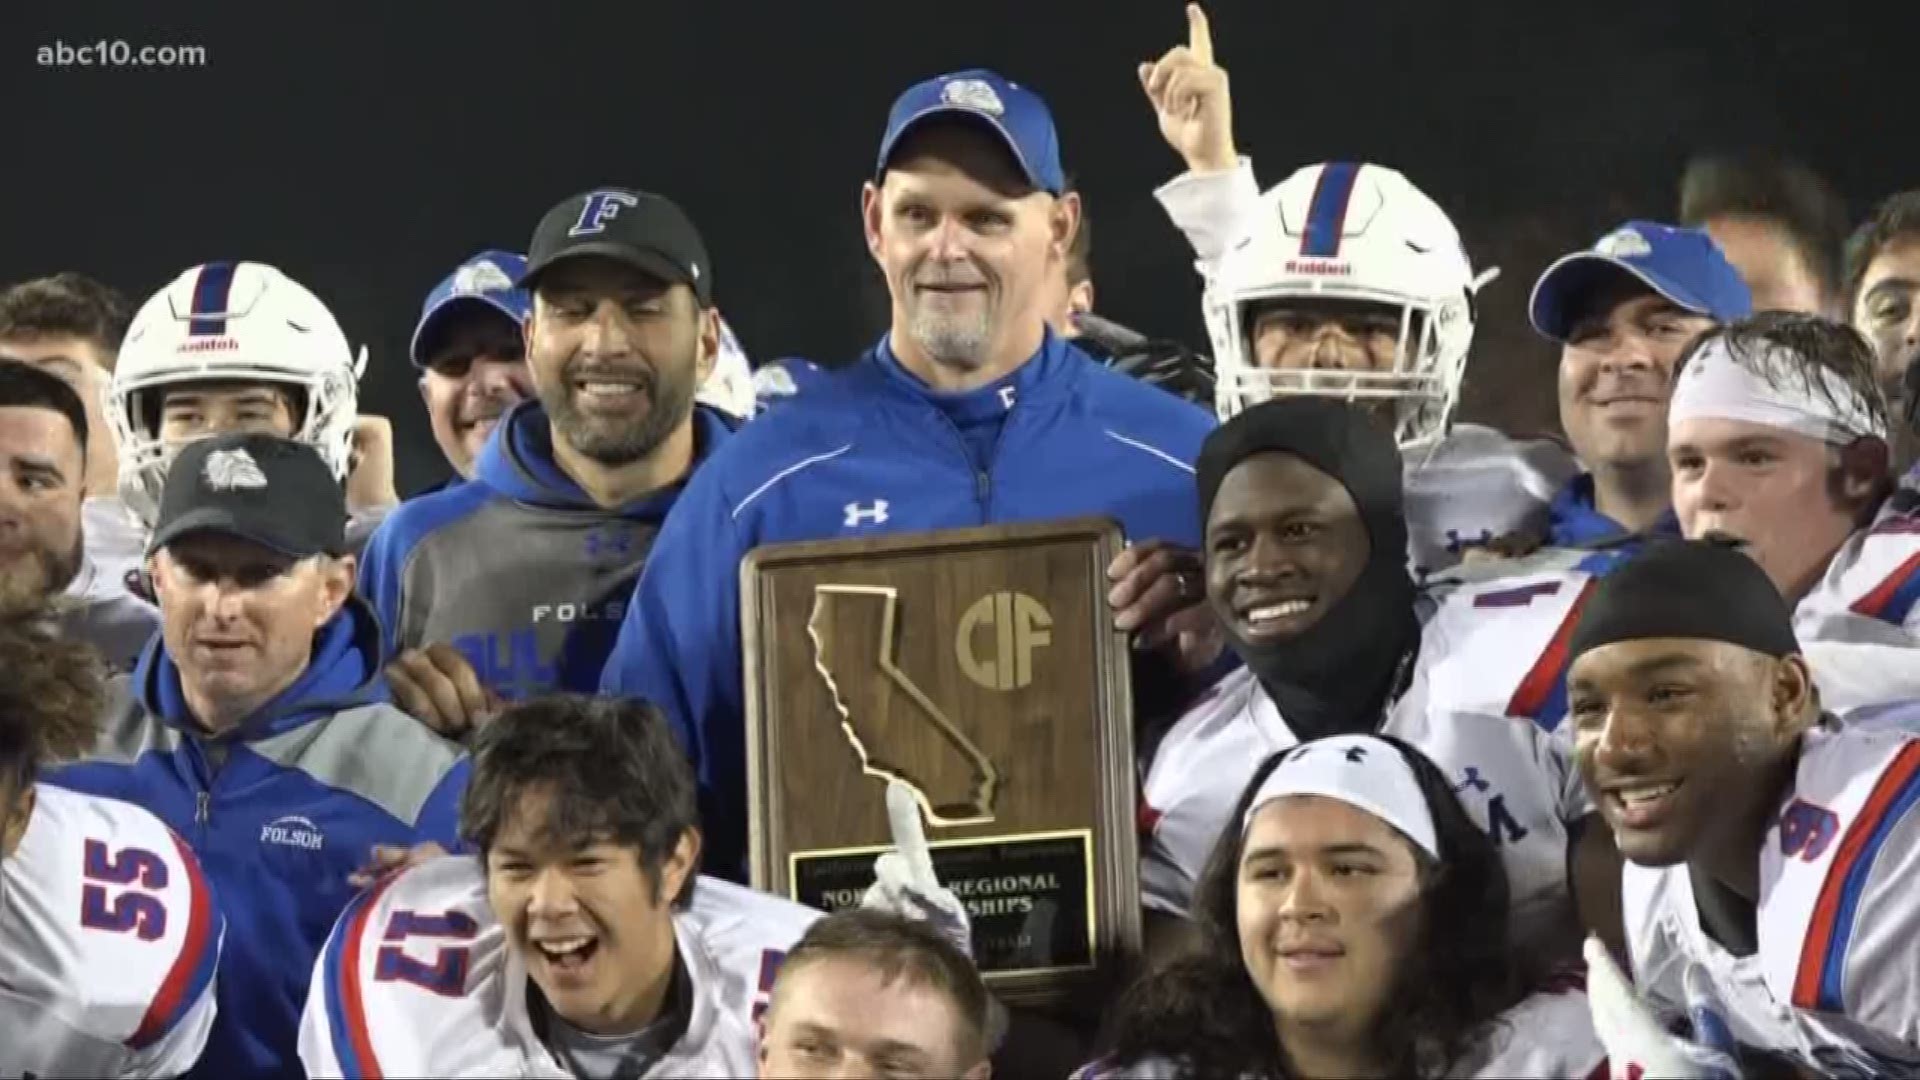 Five area football teams took the field Friday night in their respective NorCal Regional Championship Games.